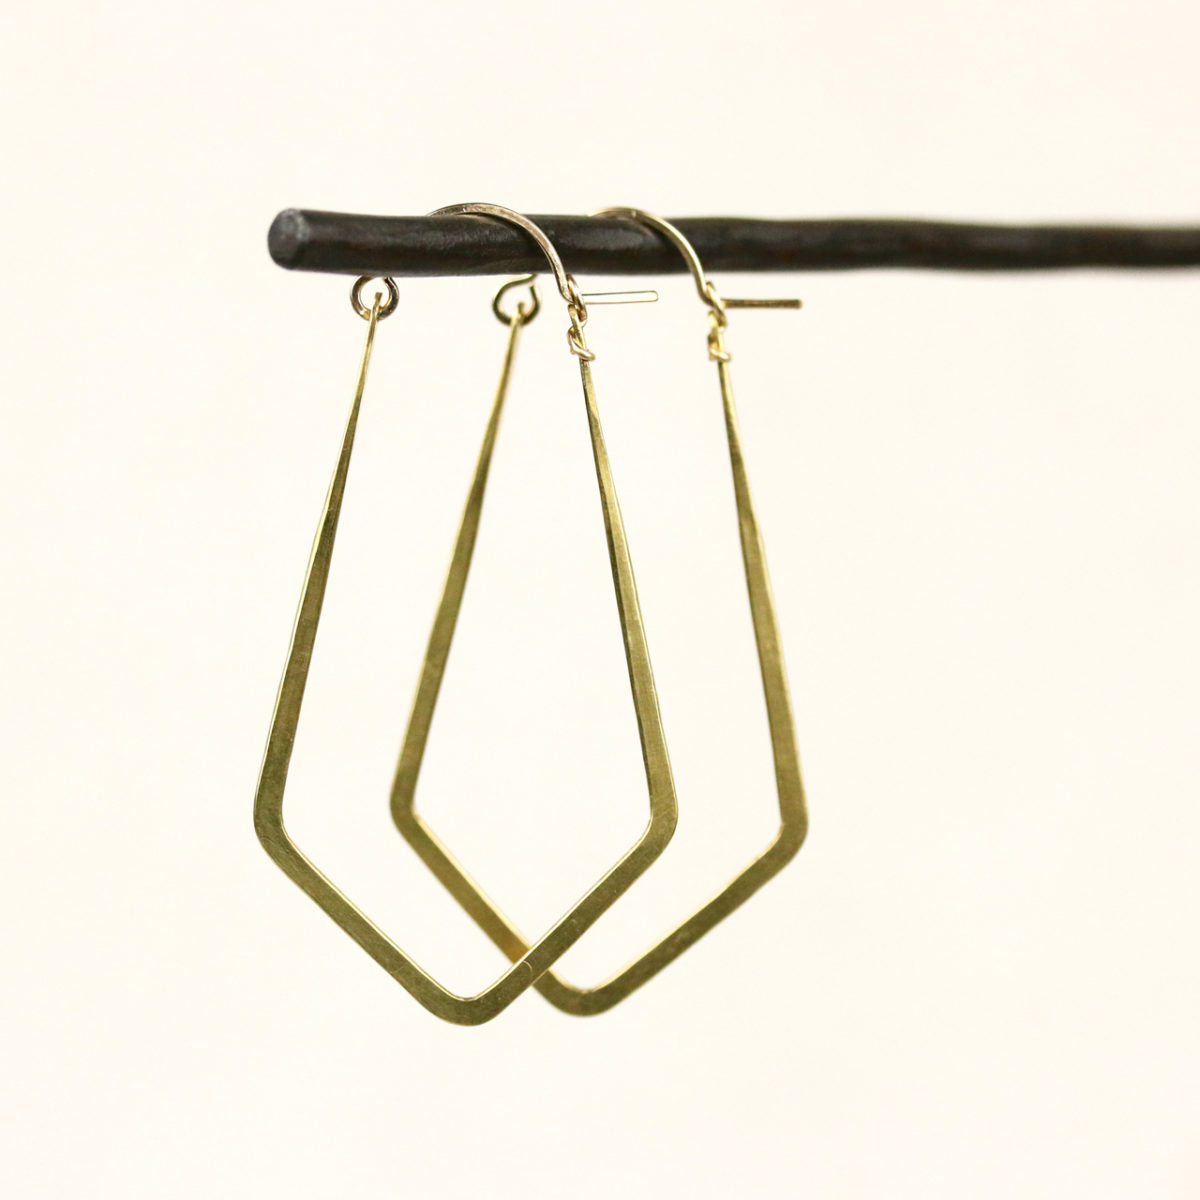 bronze-and-gold-fill-oryx-hoop-earrings